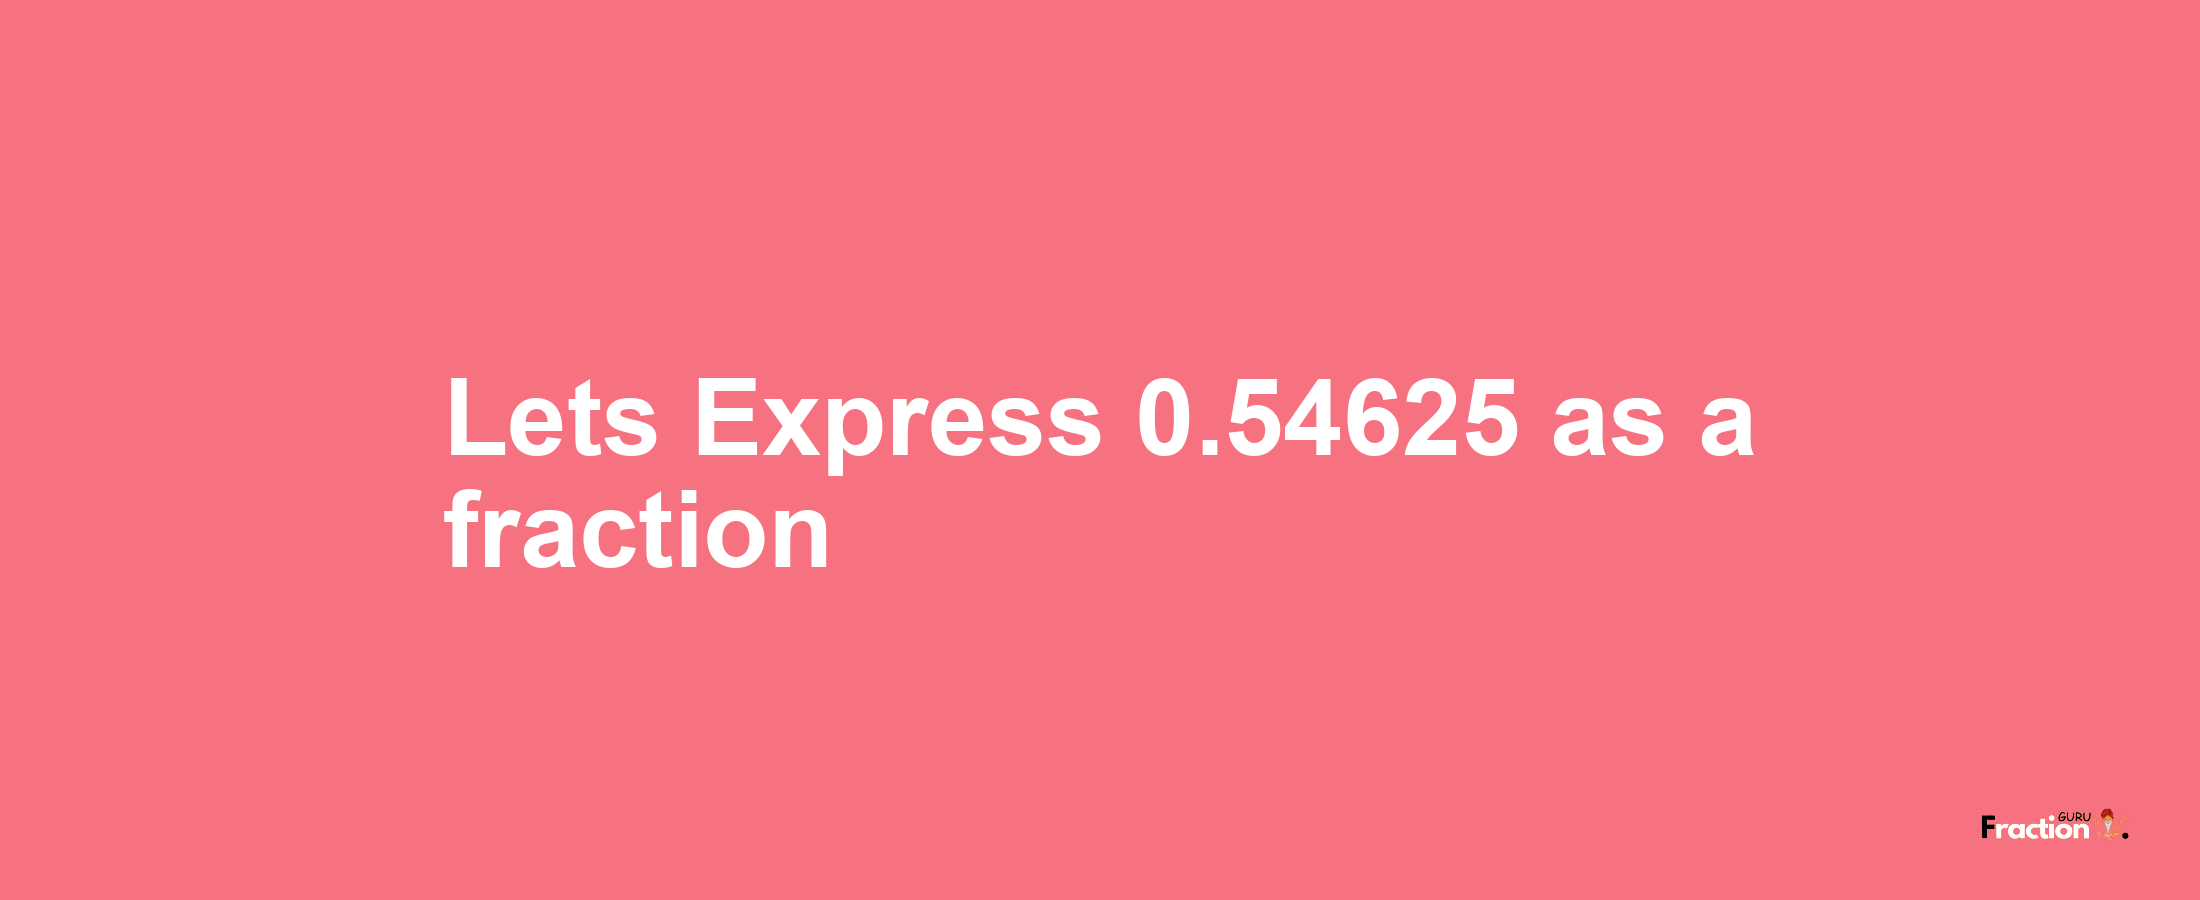 Lets Express 0.54625 as afraction